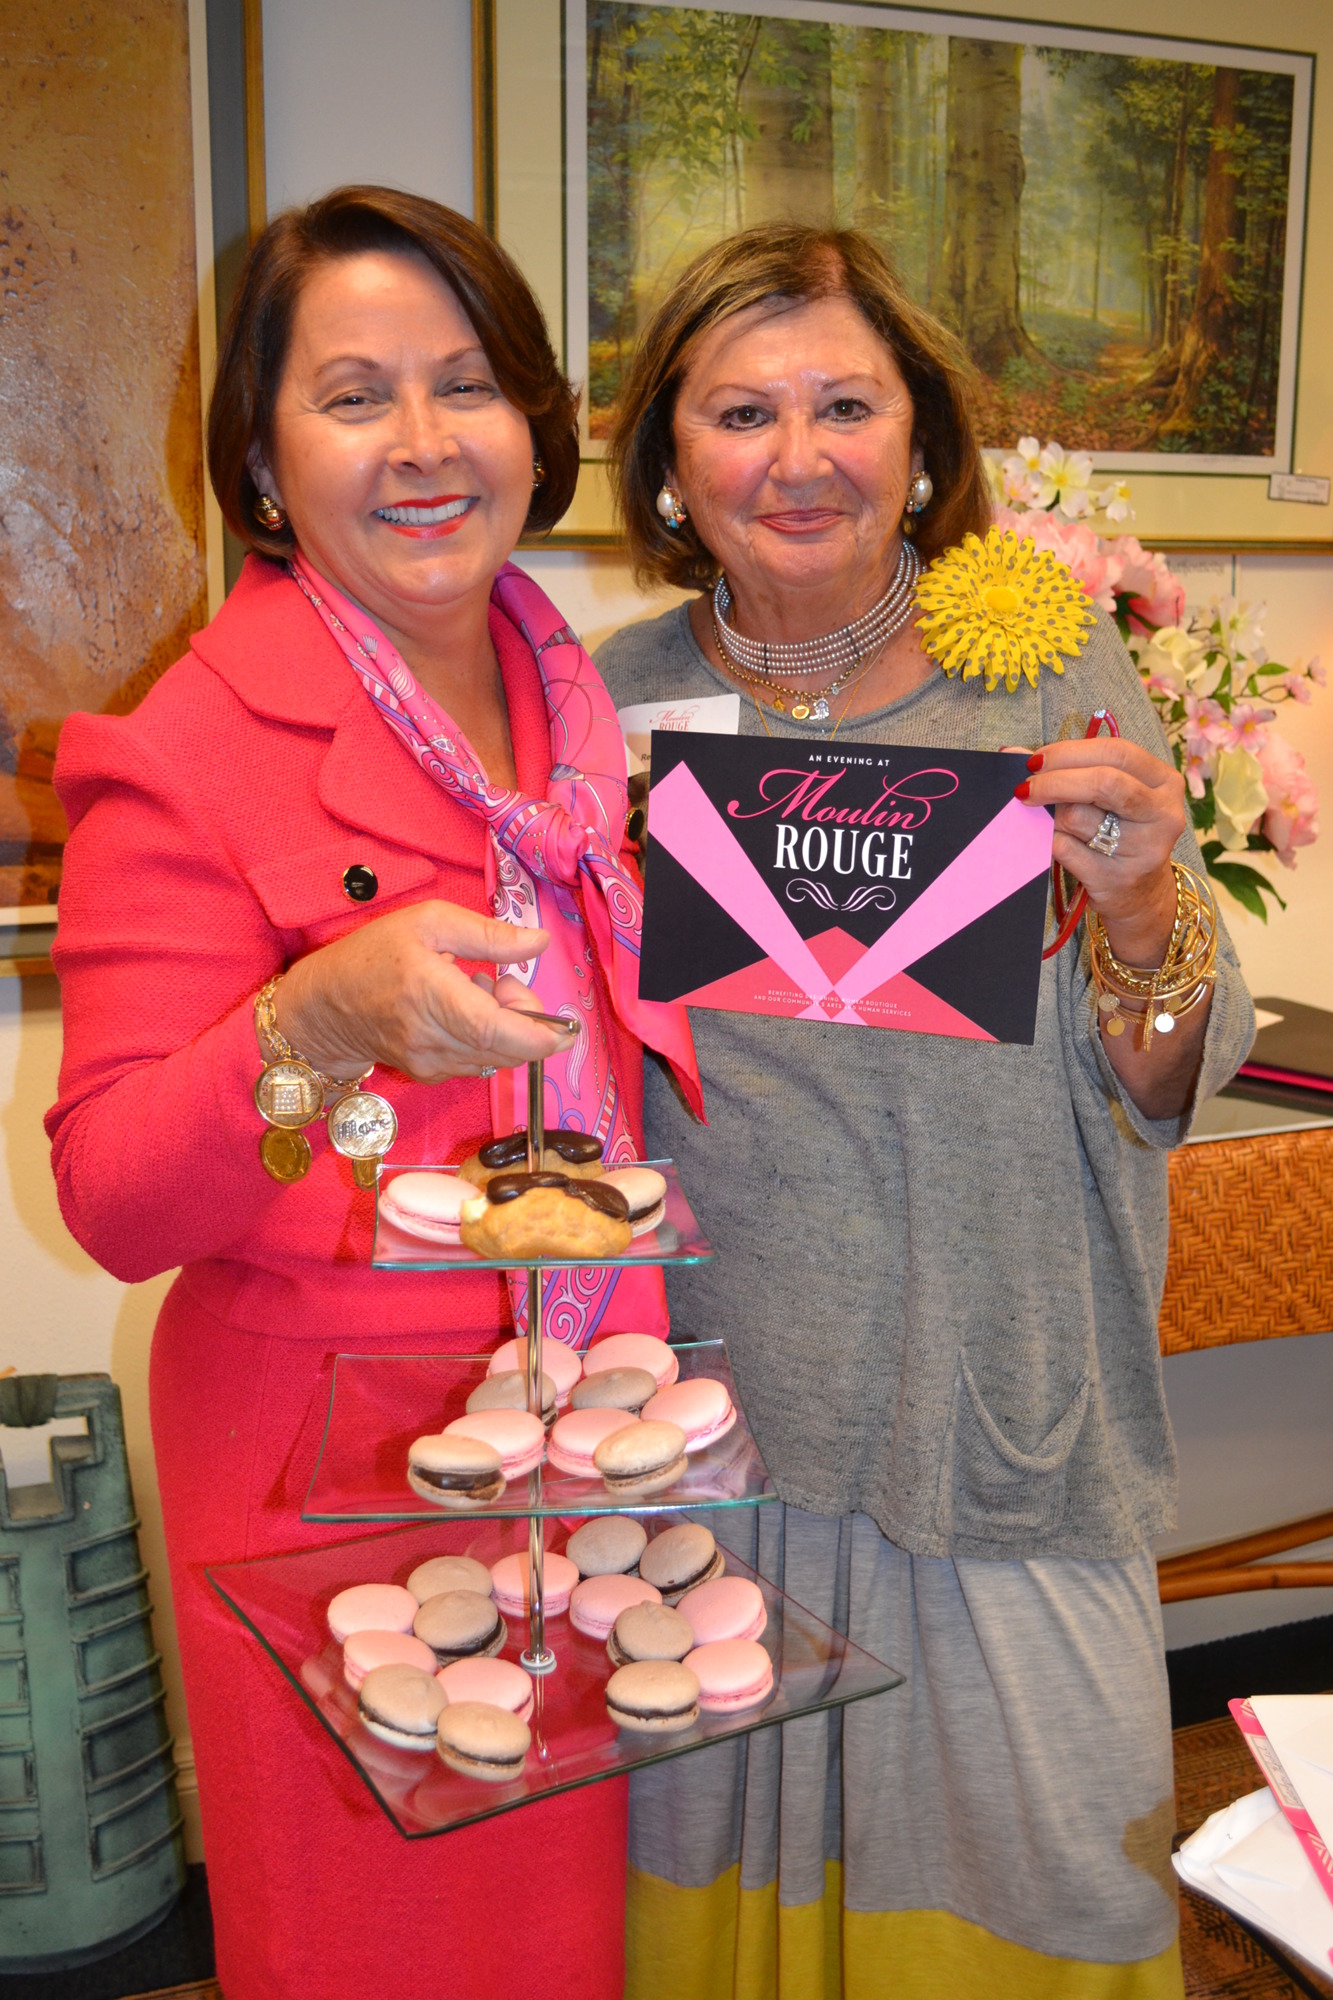 Co-chairs Kathy Coffey and Renee Hamad served macarons to their committee for 